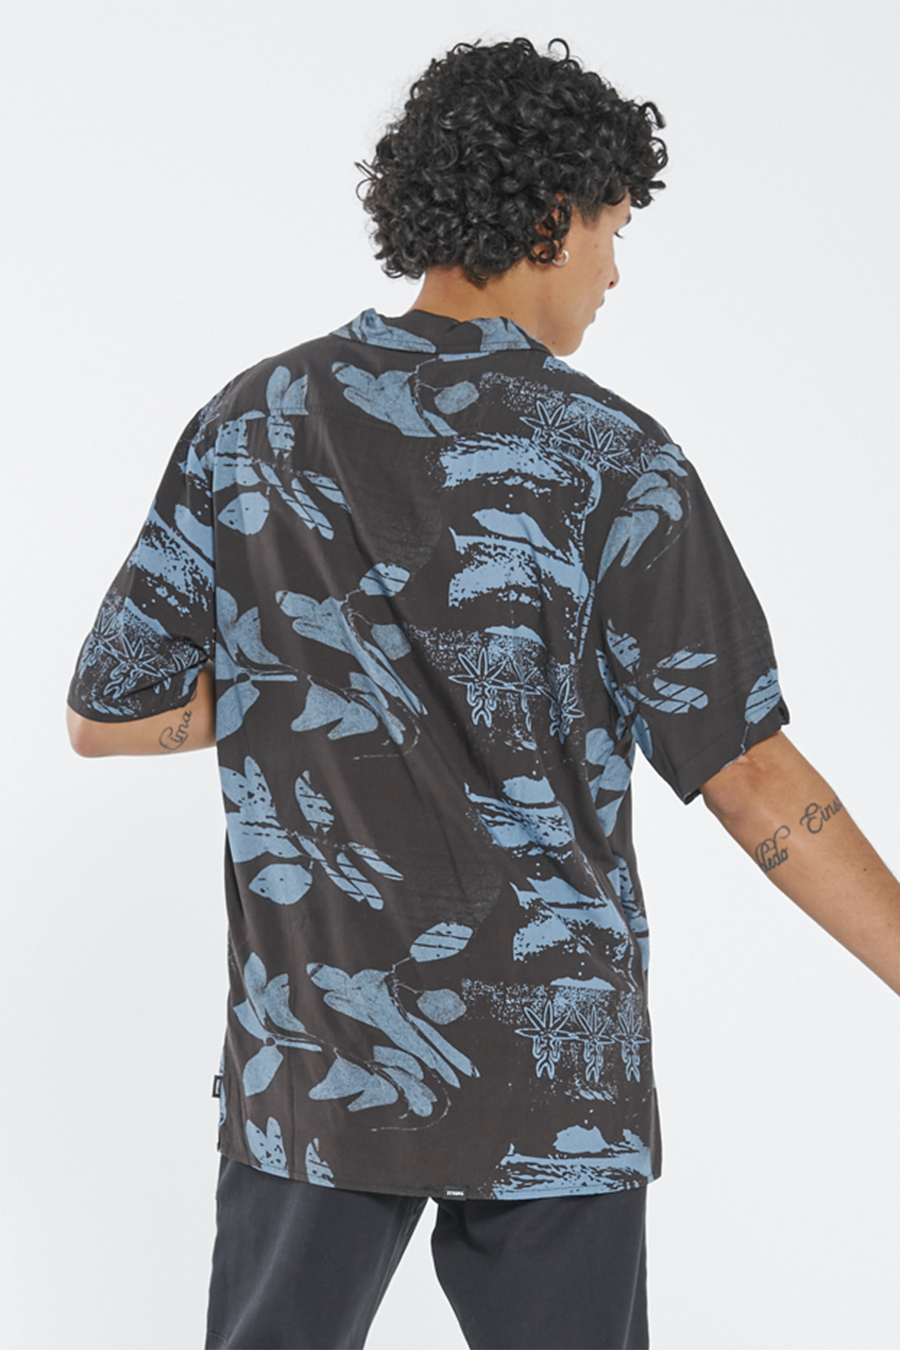 Collective Experience Bowling Shirt | Black - Main Image Number 2 of 2